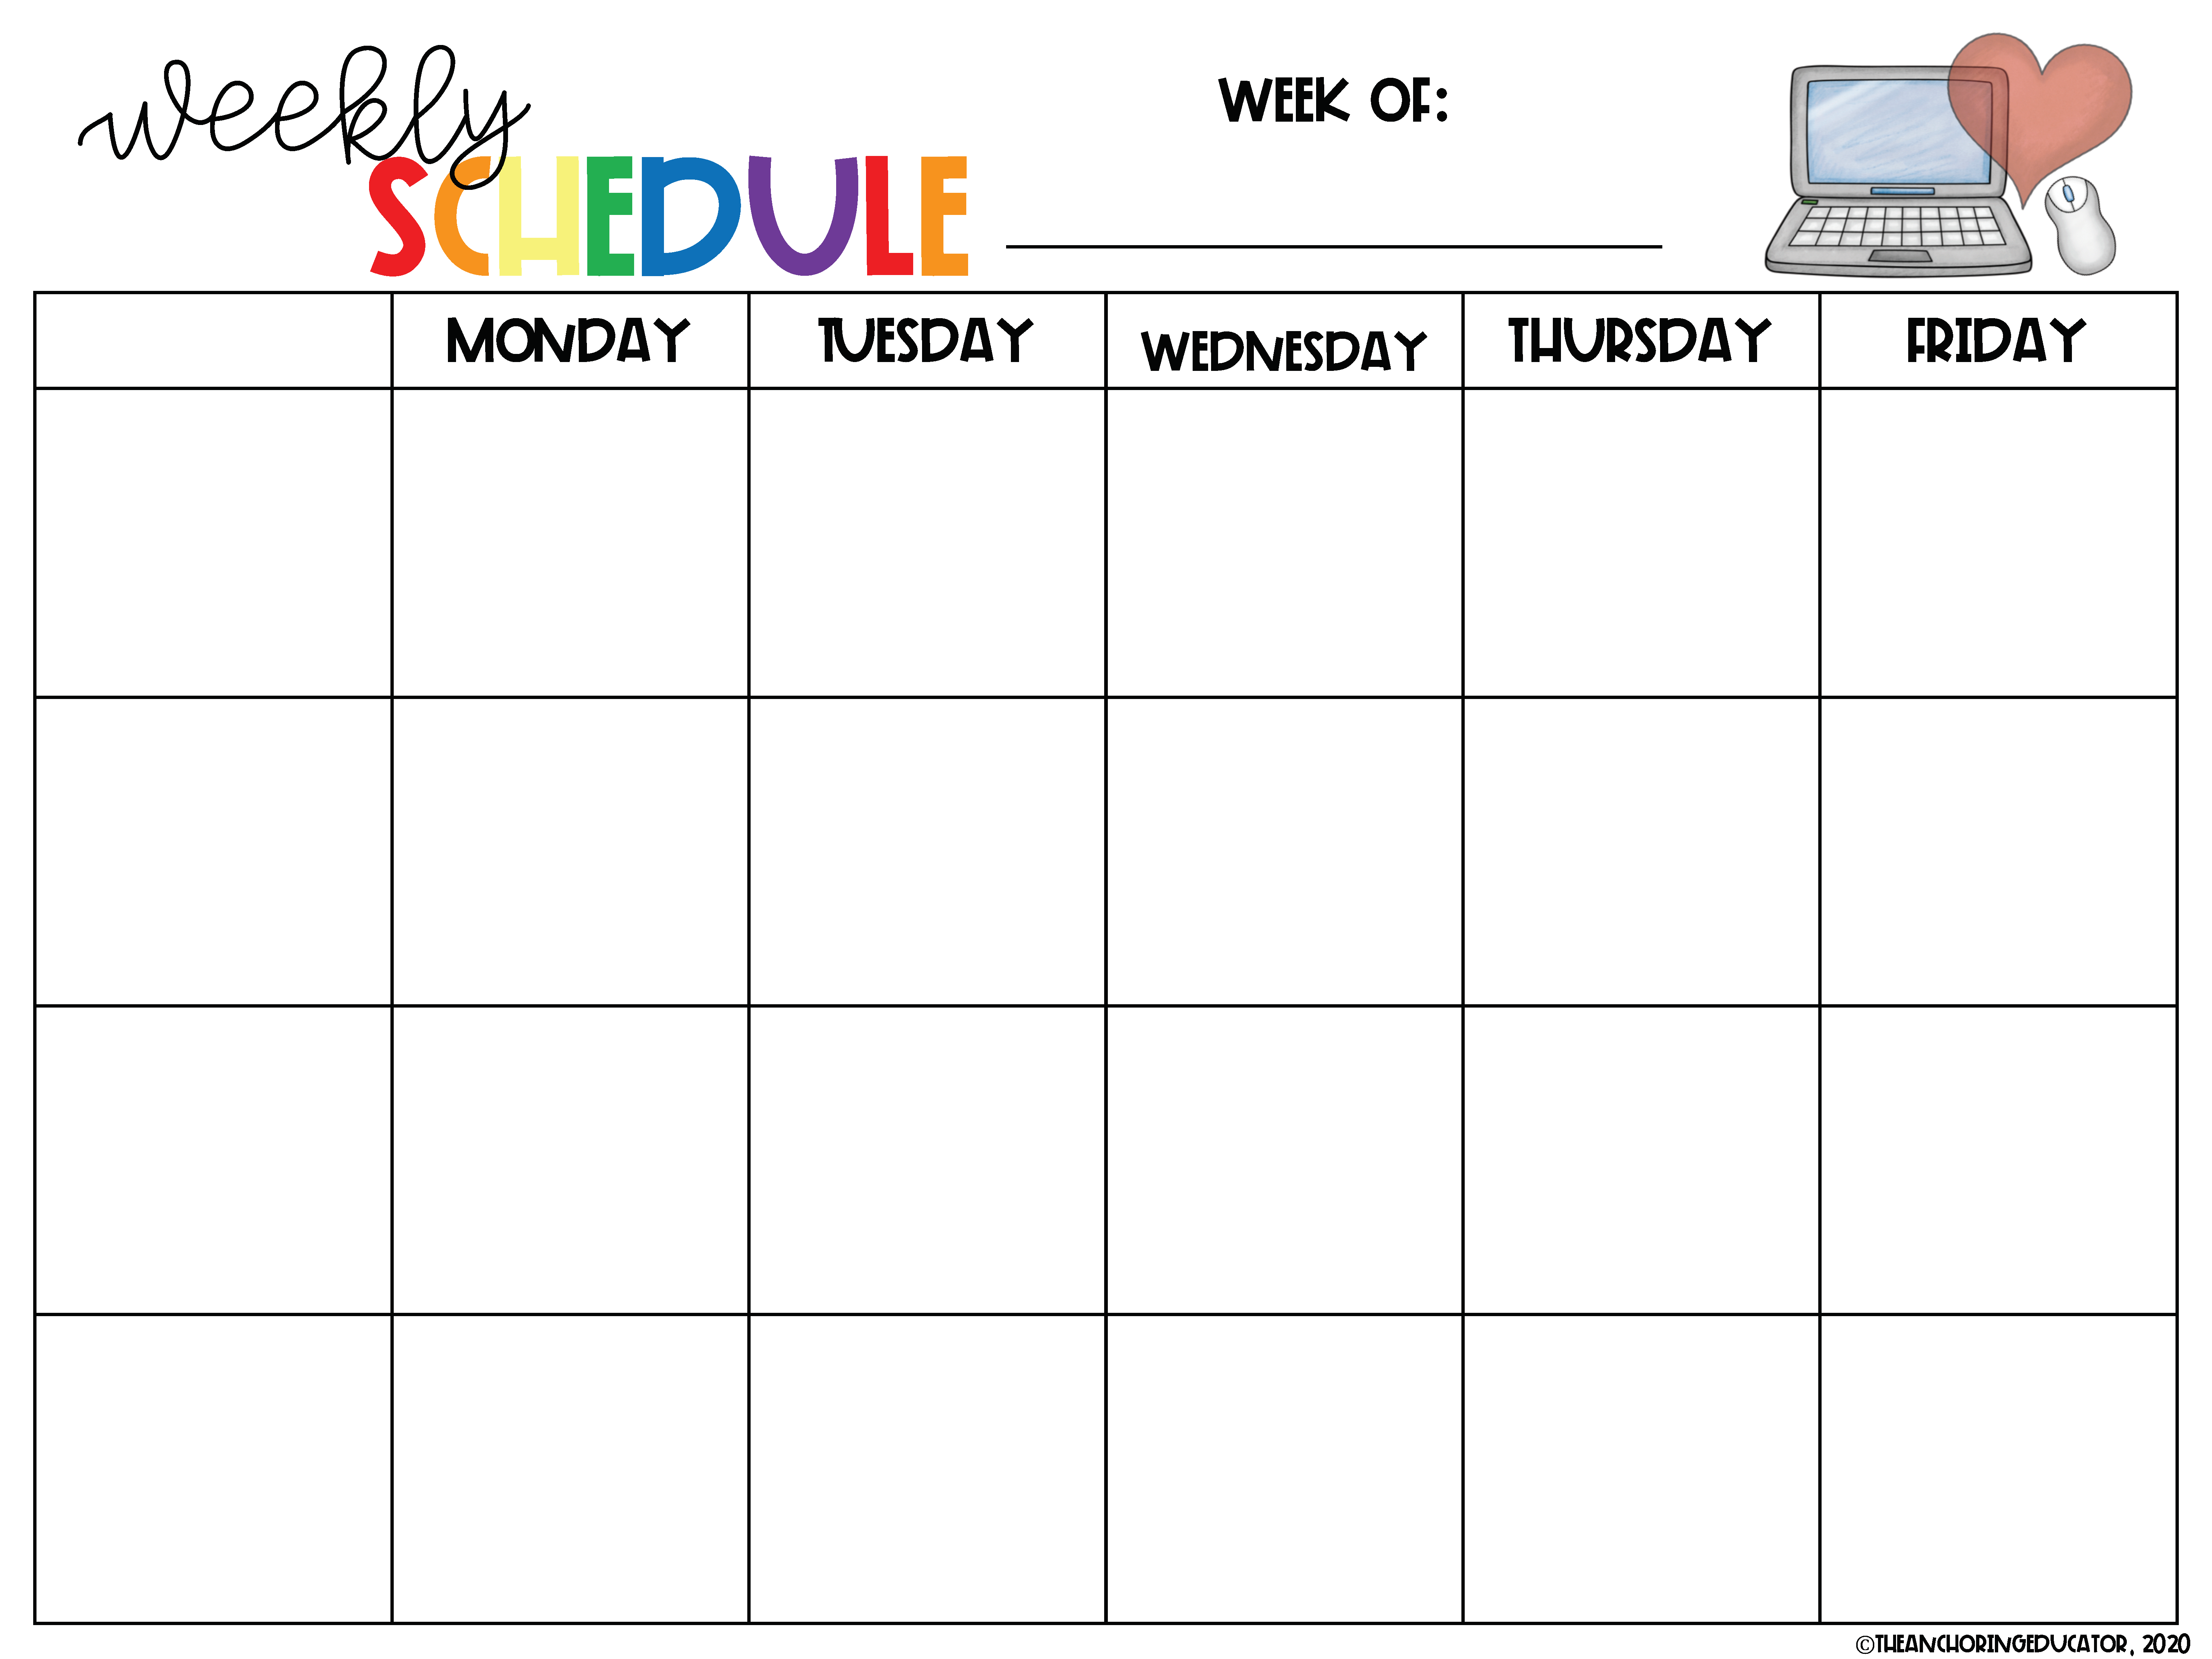 Weekly Schedule Templates for Distance Learning